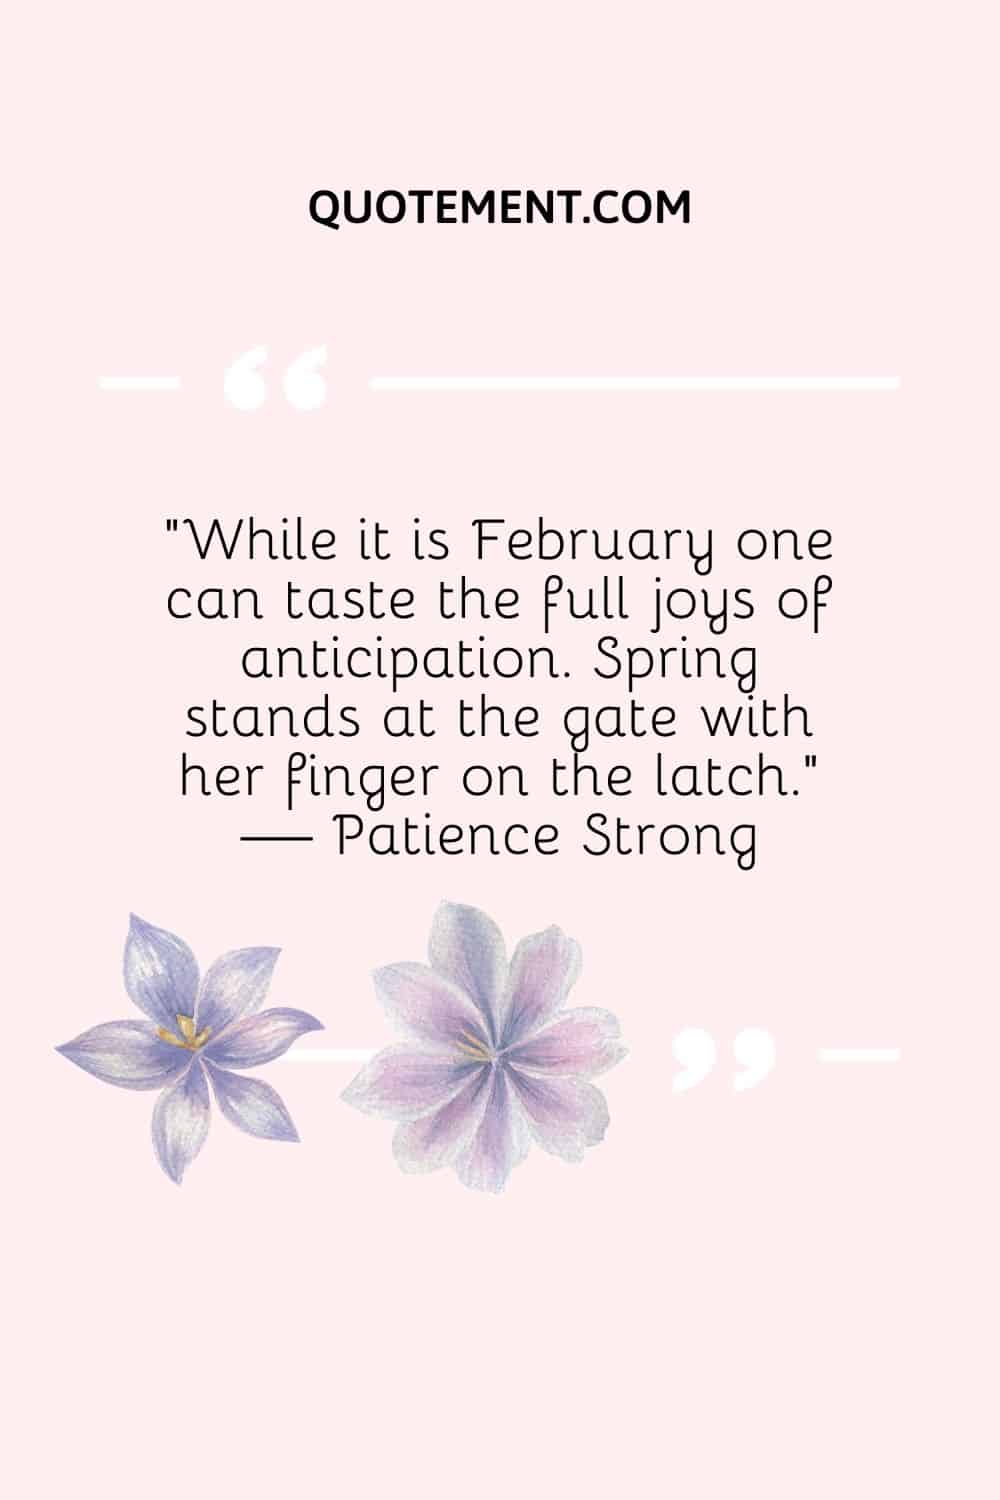 “While it is February one can taste the full joys of anticipation. Spring stands at the gate with her finger on the latch.” — Patience Strong